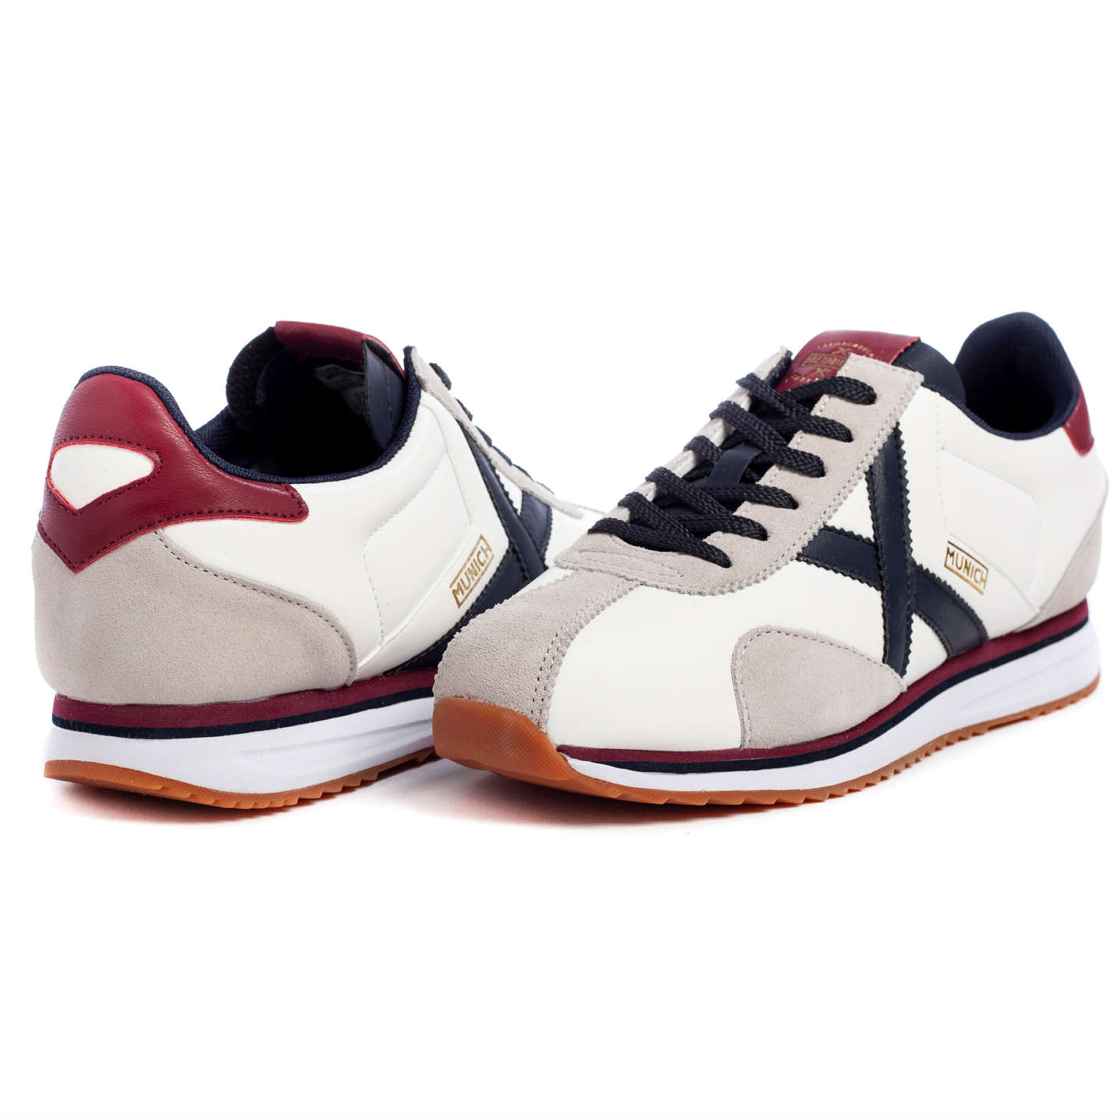 Munich Mens Sapporo 93 Leather Trainers - White / Navy